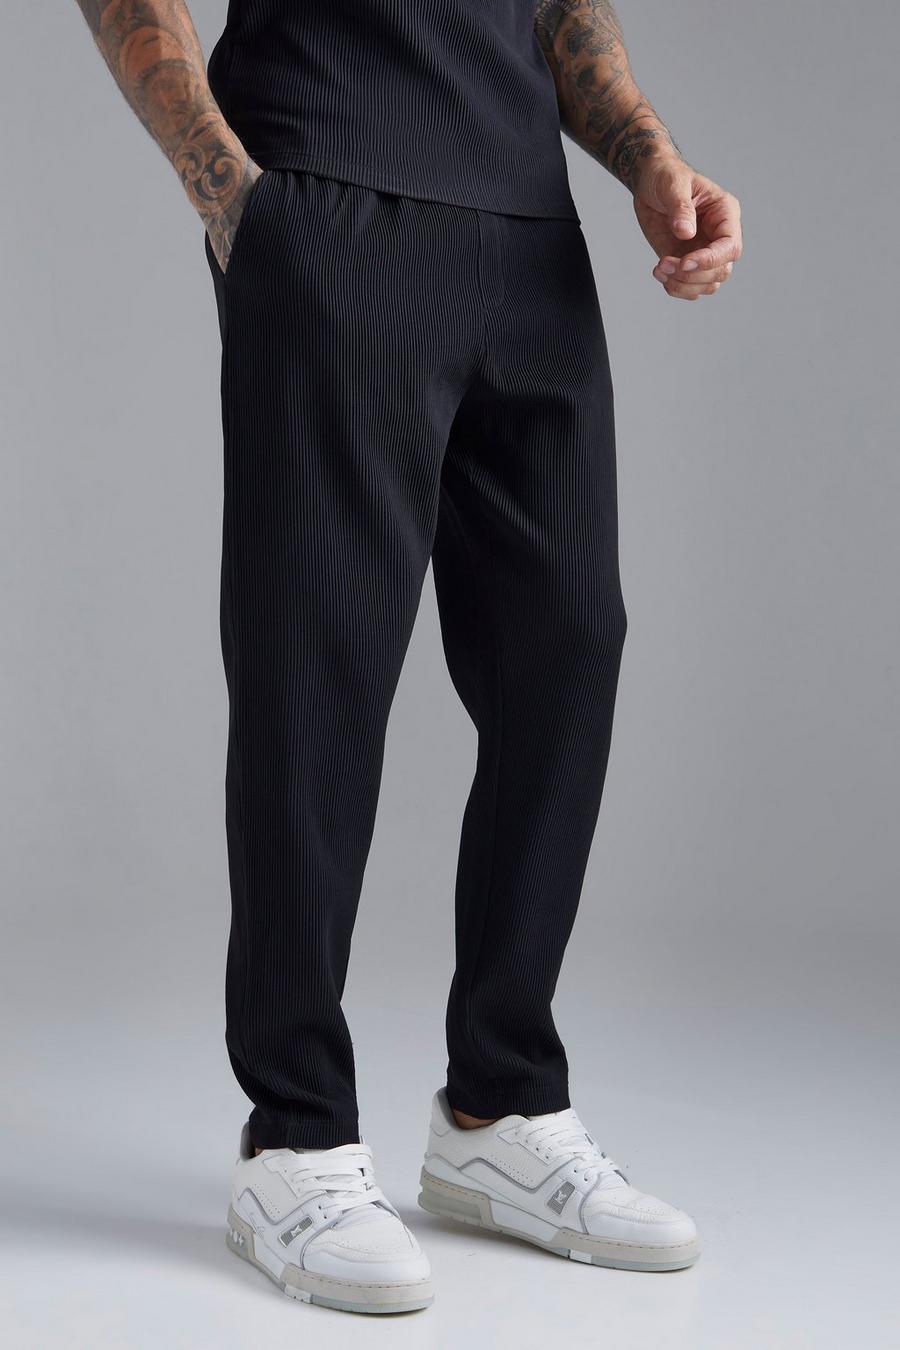 Men's Pleated Trousers, Mens High Waisted Pleated Trousers